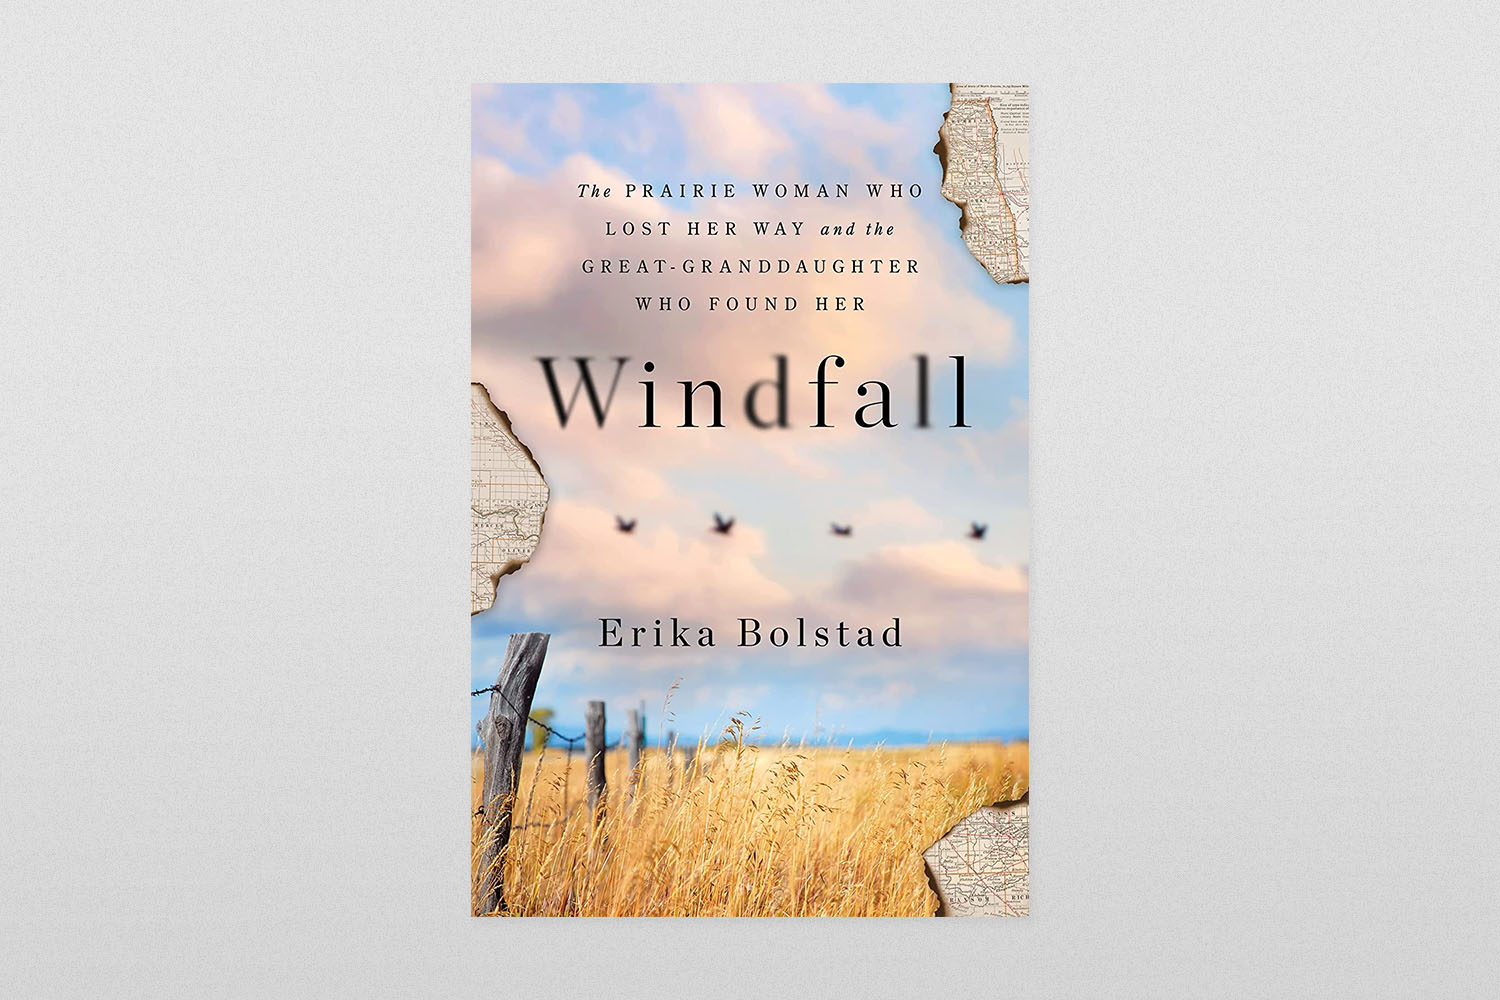 Windfall- The Prairie Woman Who Lost Her Way and the Great-Granddaughter Who Found Her